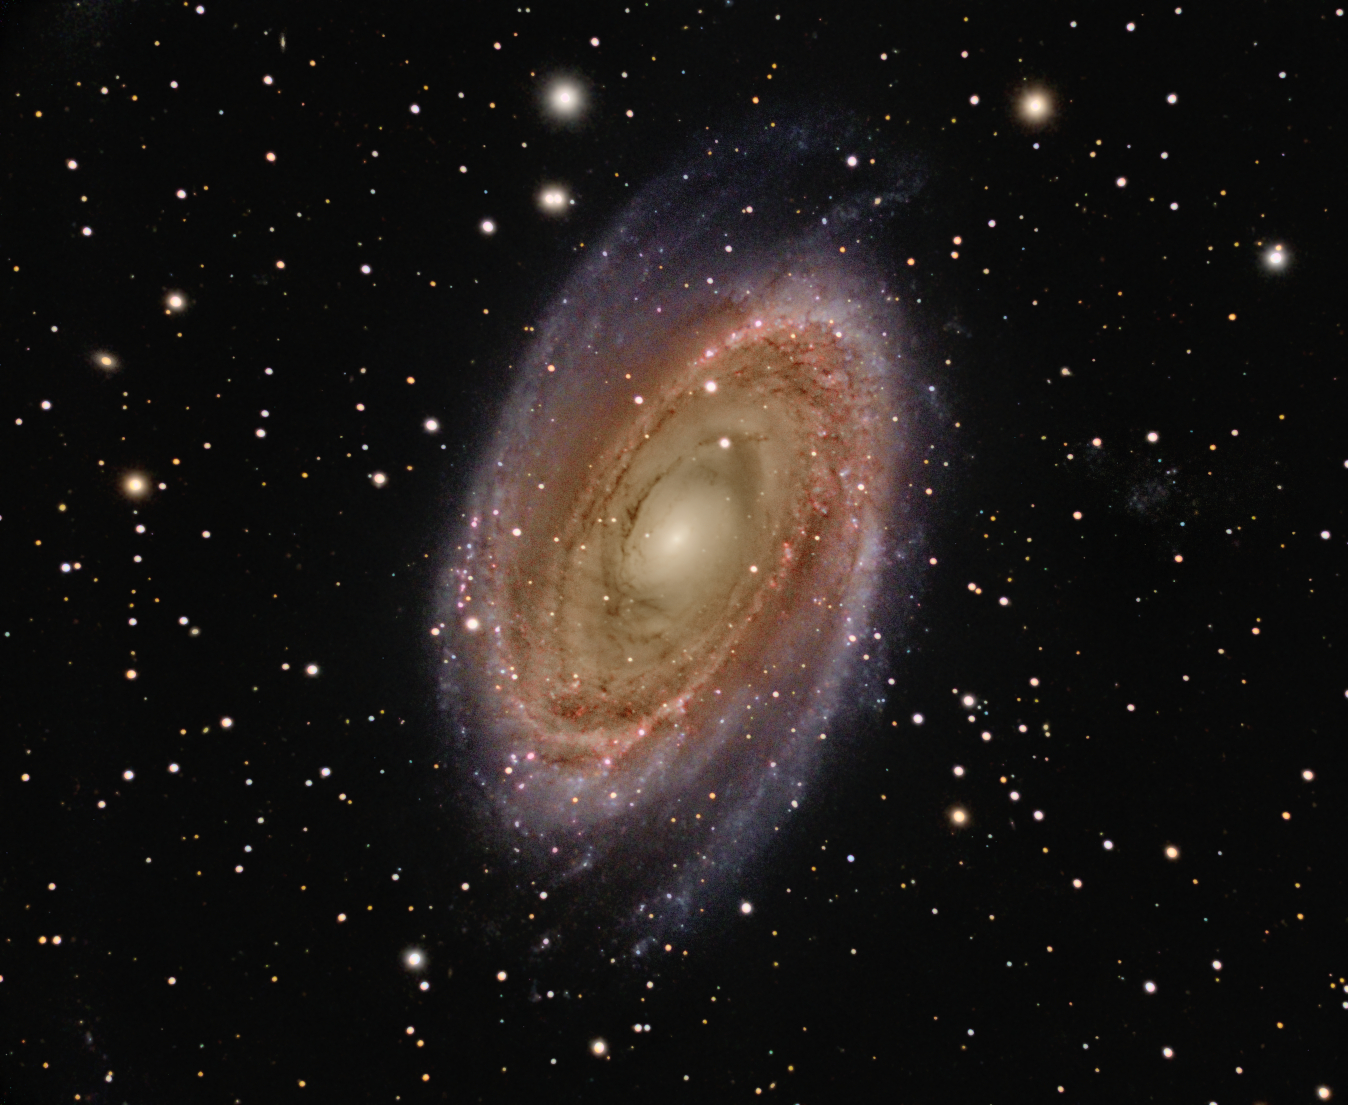 M81 - Bode's Galaxy by Terry Riopka